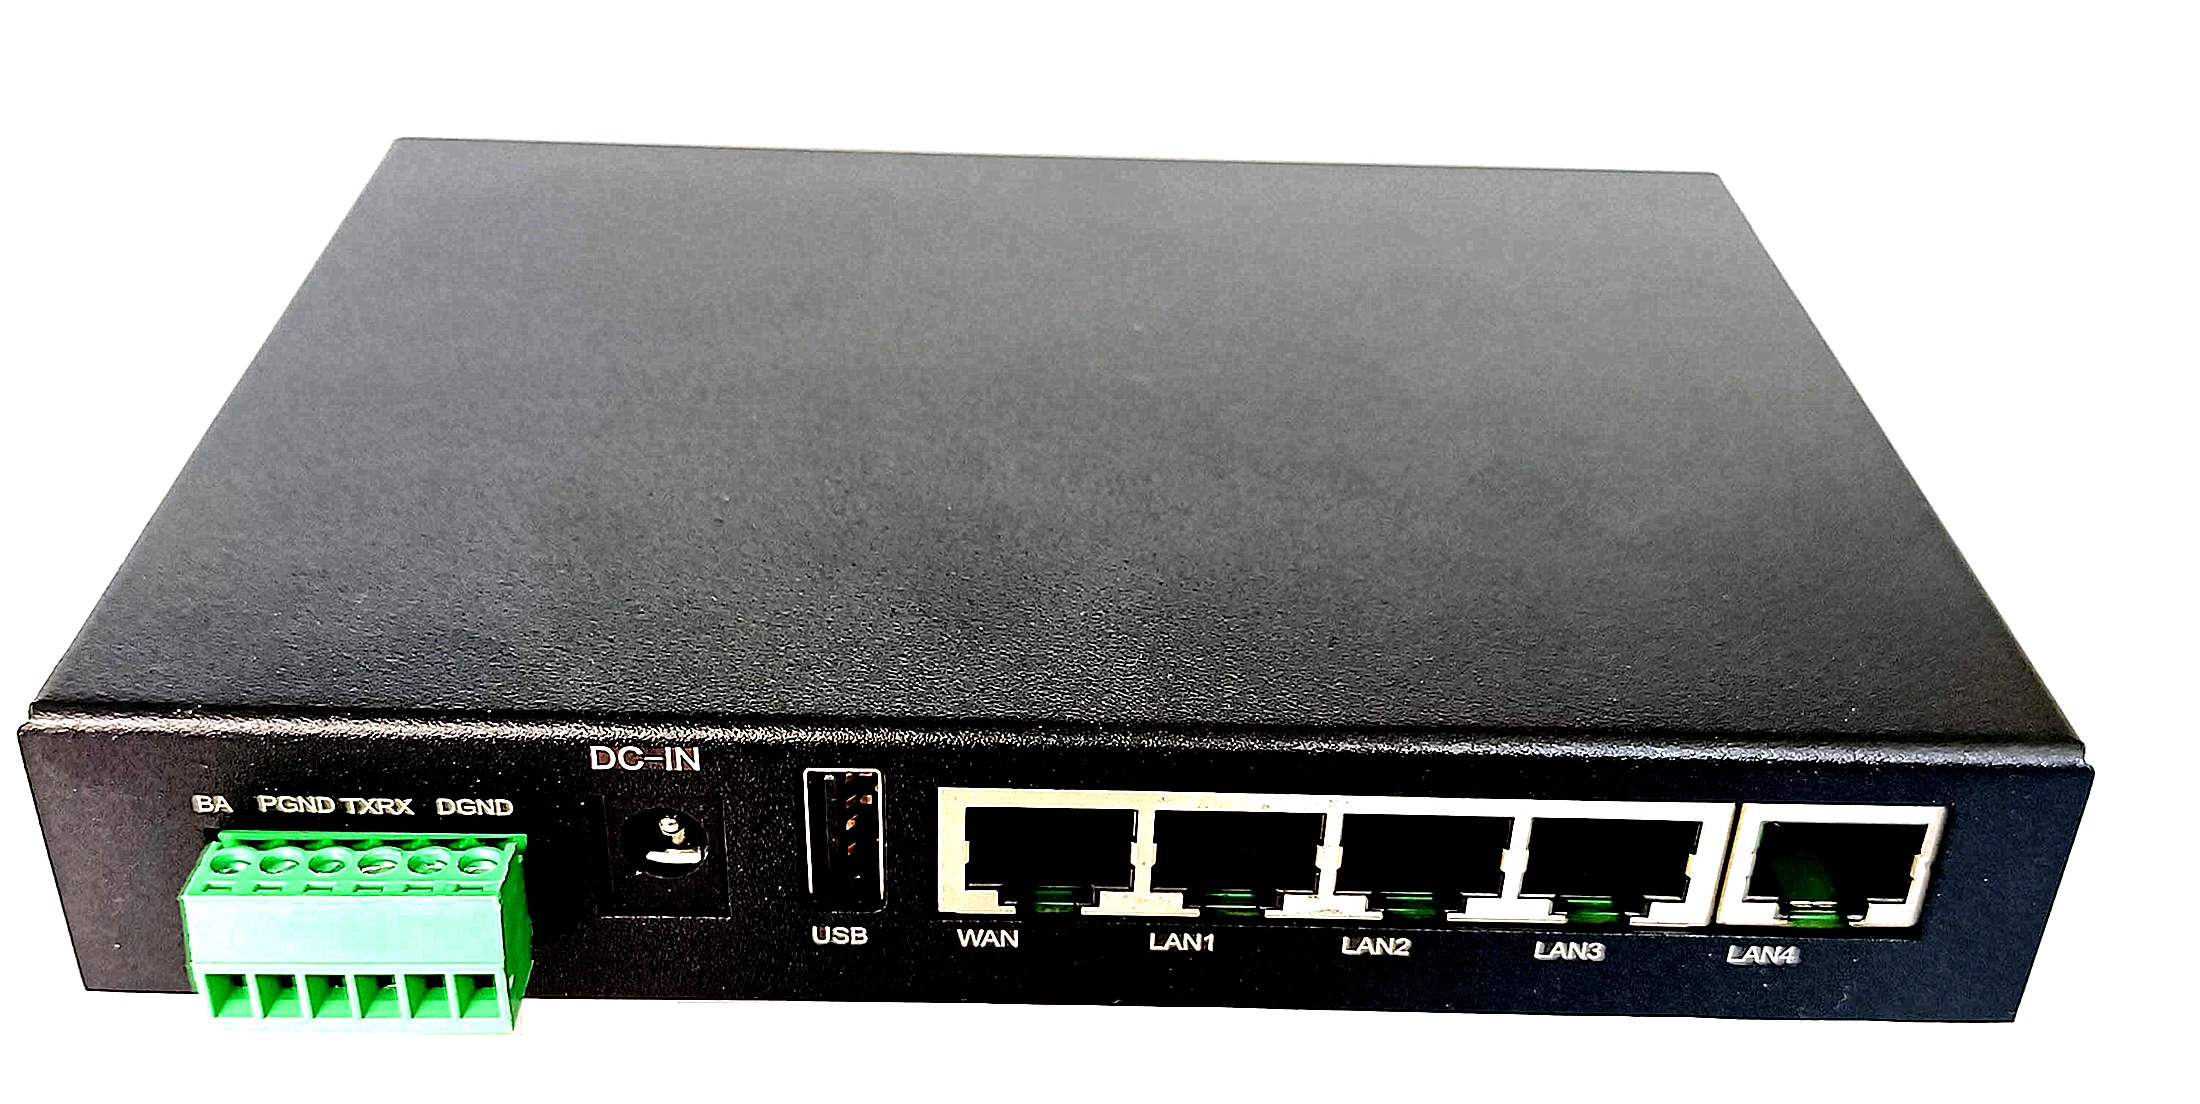 
5G NR bands CPE Industrial router 1.2Gbps high speed gateway with dual SIM for advanced speed applications 